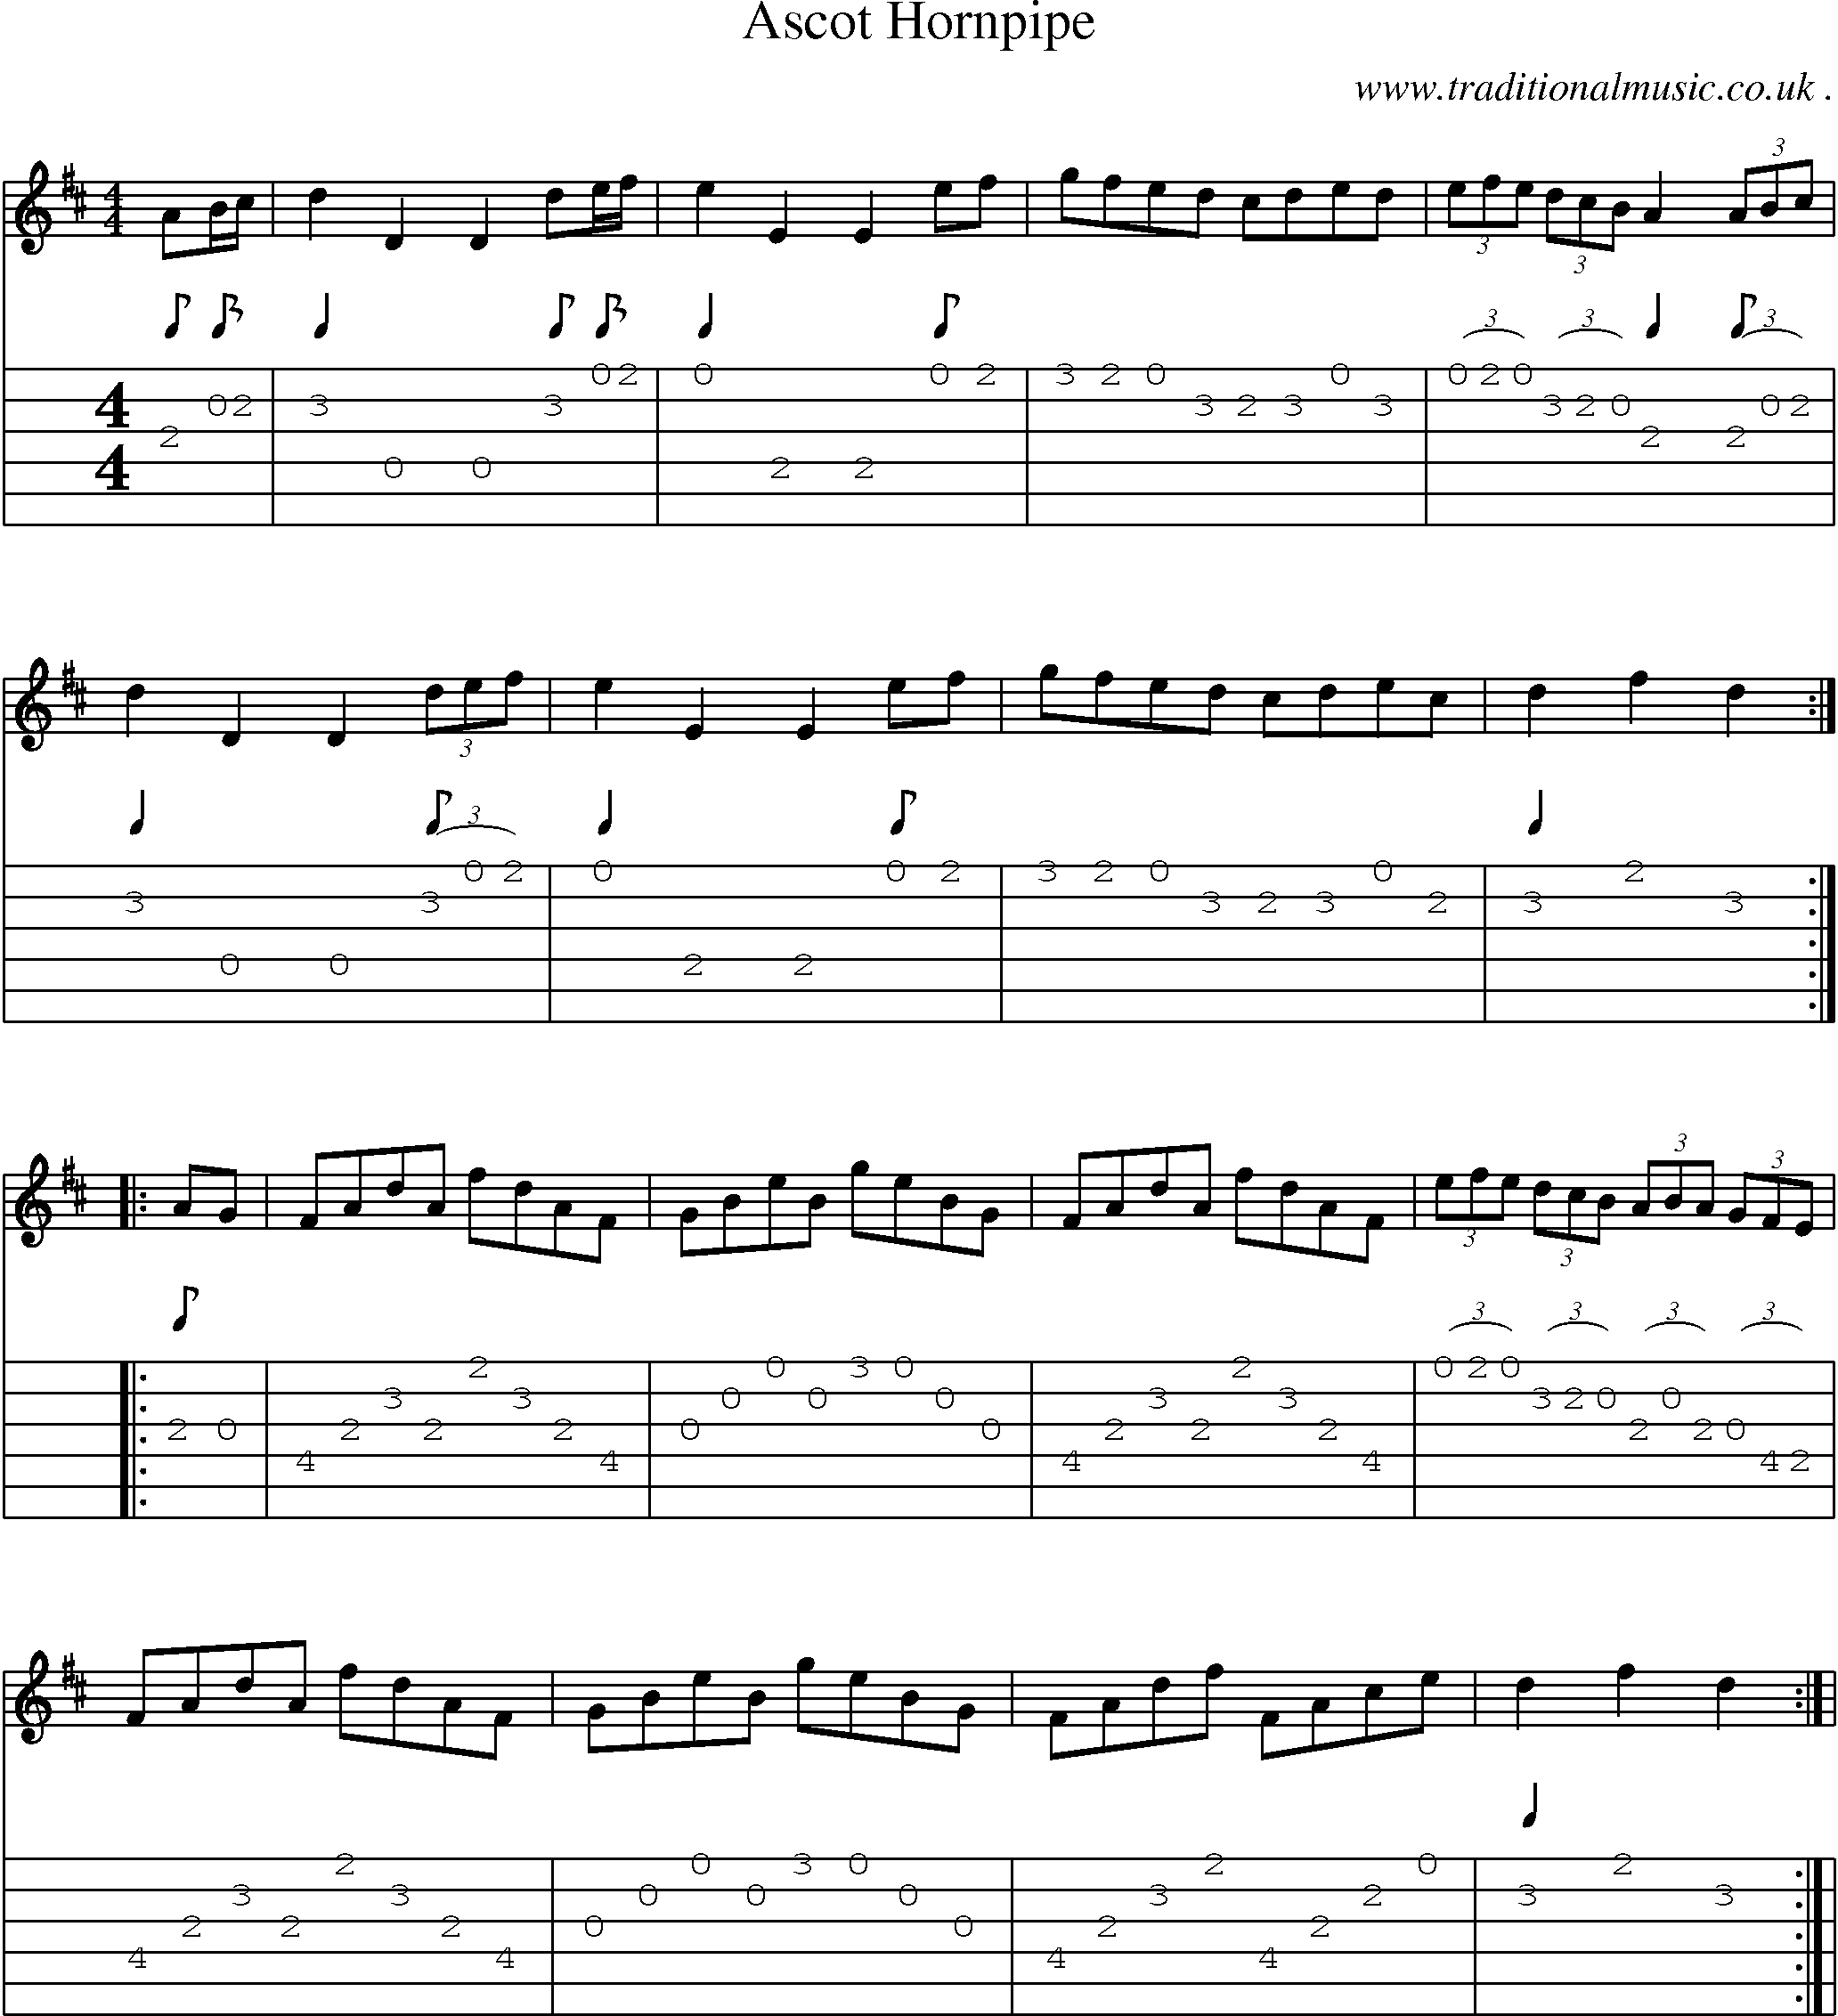 Sheet-Music and Guitar Tabs for Ascot Hornpipe